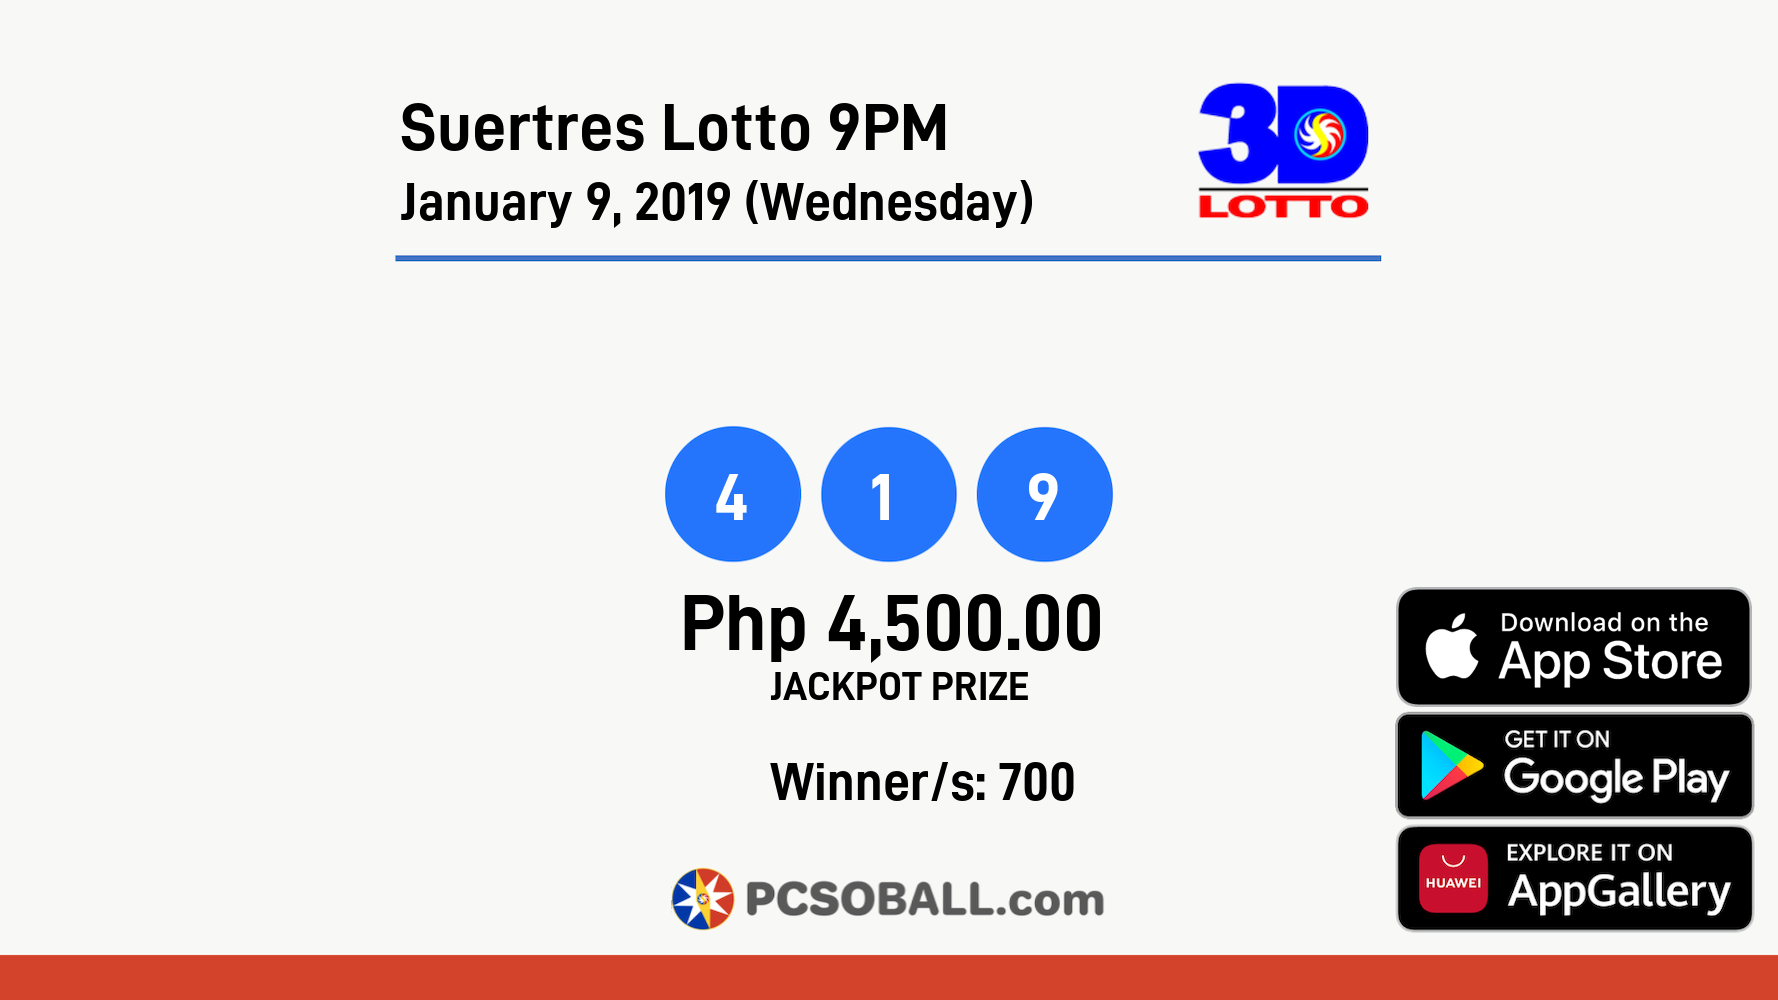 Suertres Lotto 9PM January 9, 2019 (Wednesday) Result